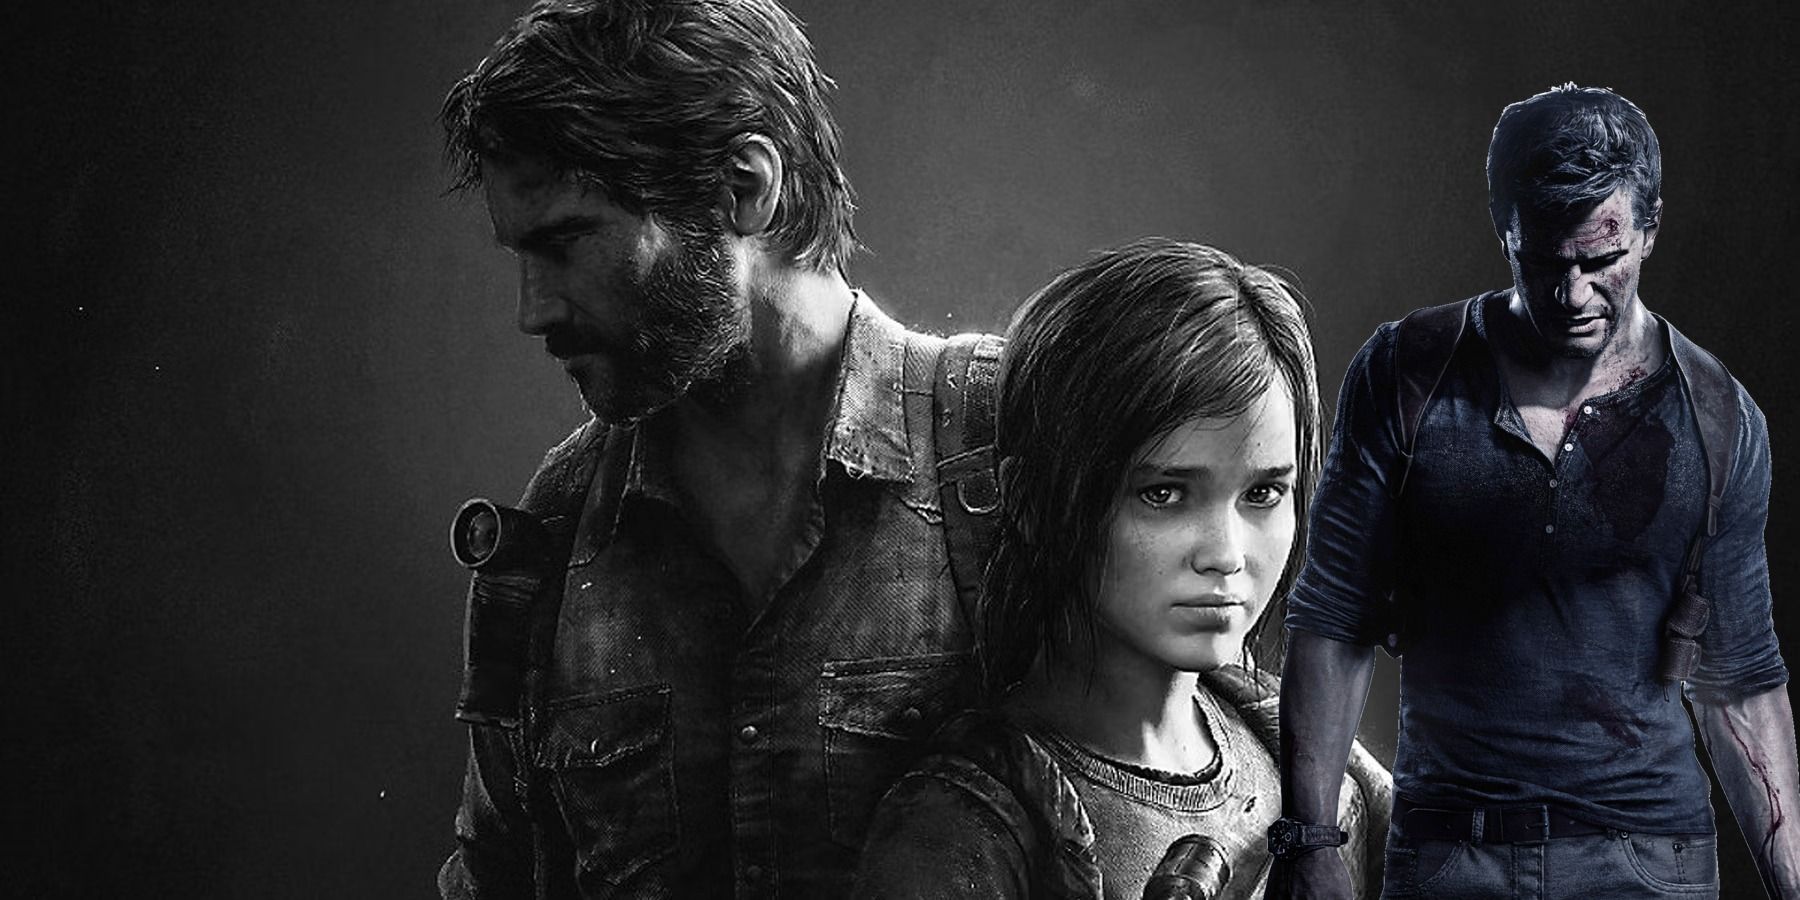 Giants Called Me, JOEL! on X: If Uncharted 4 was getting the same  treatment as TLOU2, Washington Post would be the SkillUp right now. Lol  🤦🏽‍♂️🤦🏽‍♂️ #TheLastofUsPartII  / X